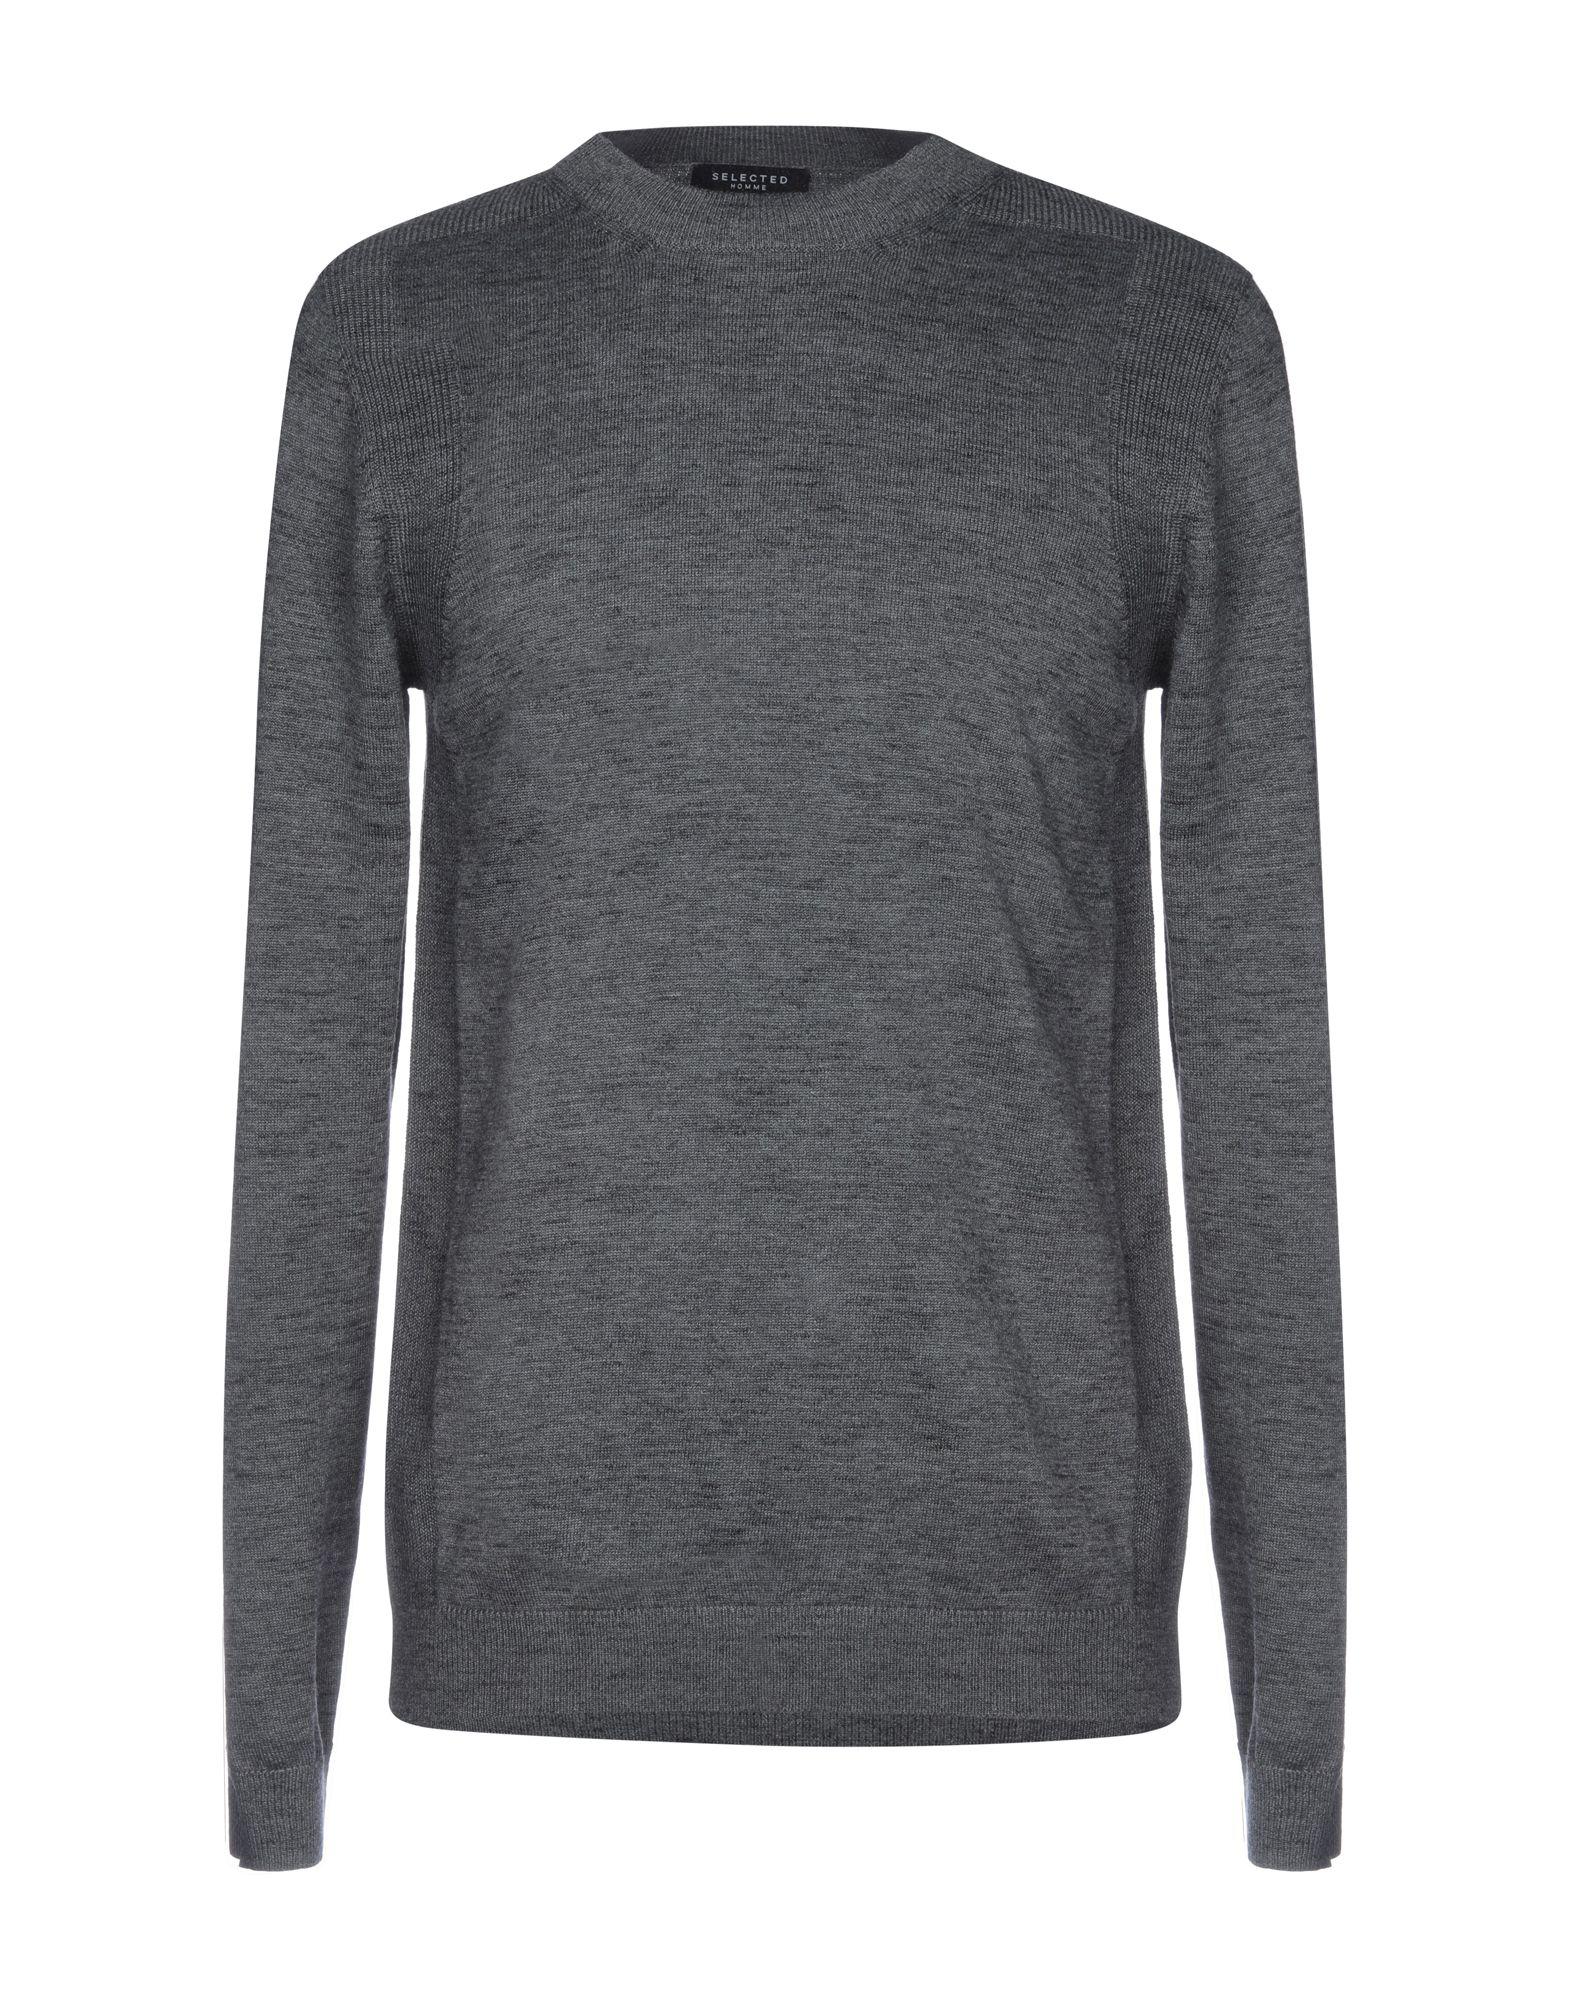 Lyst - SELECTED Jumper in Gray for Men